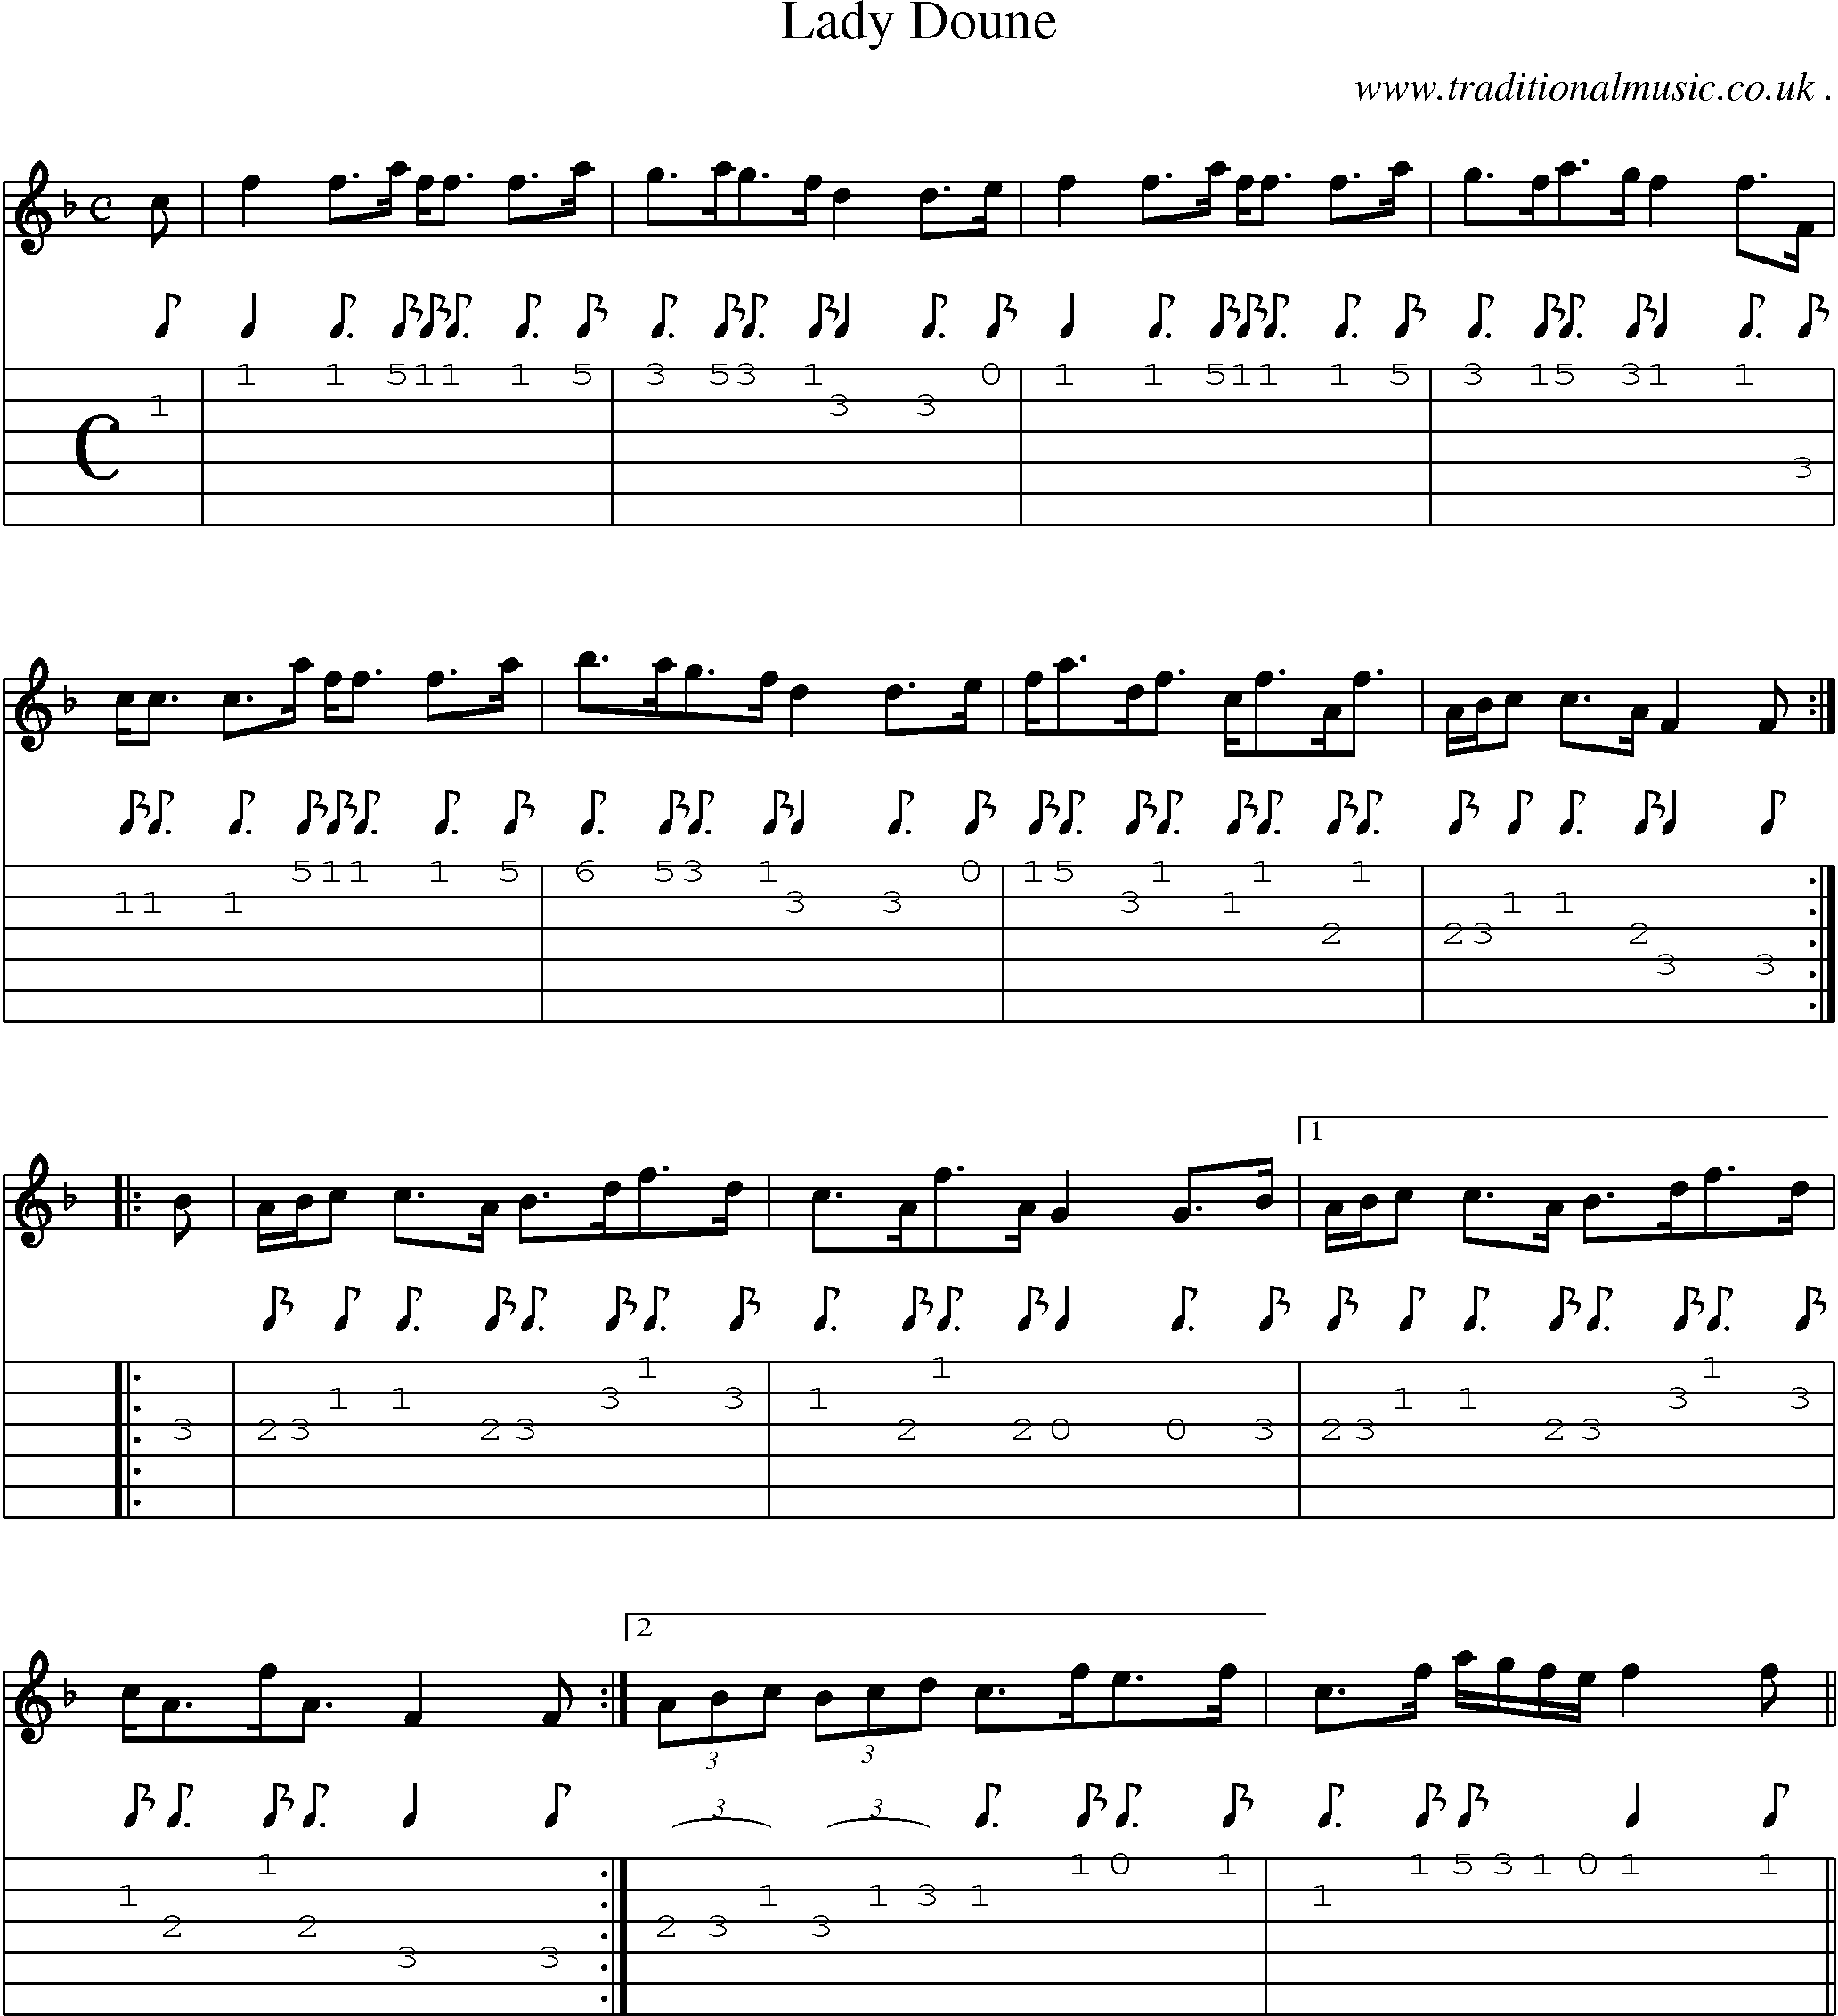 Sheet-music  score, Chords and Guitar Tabs for Lady Doune